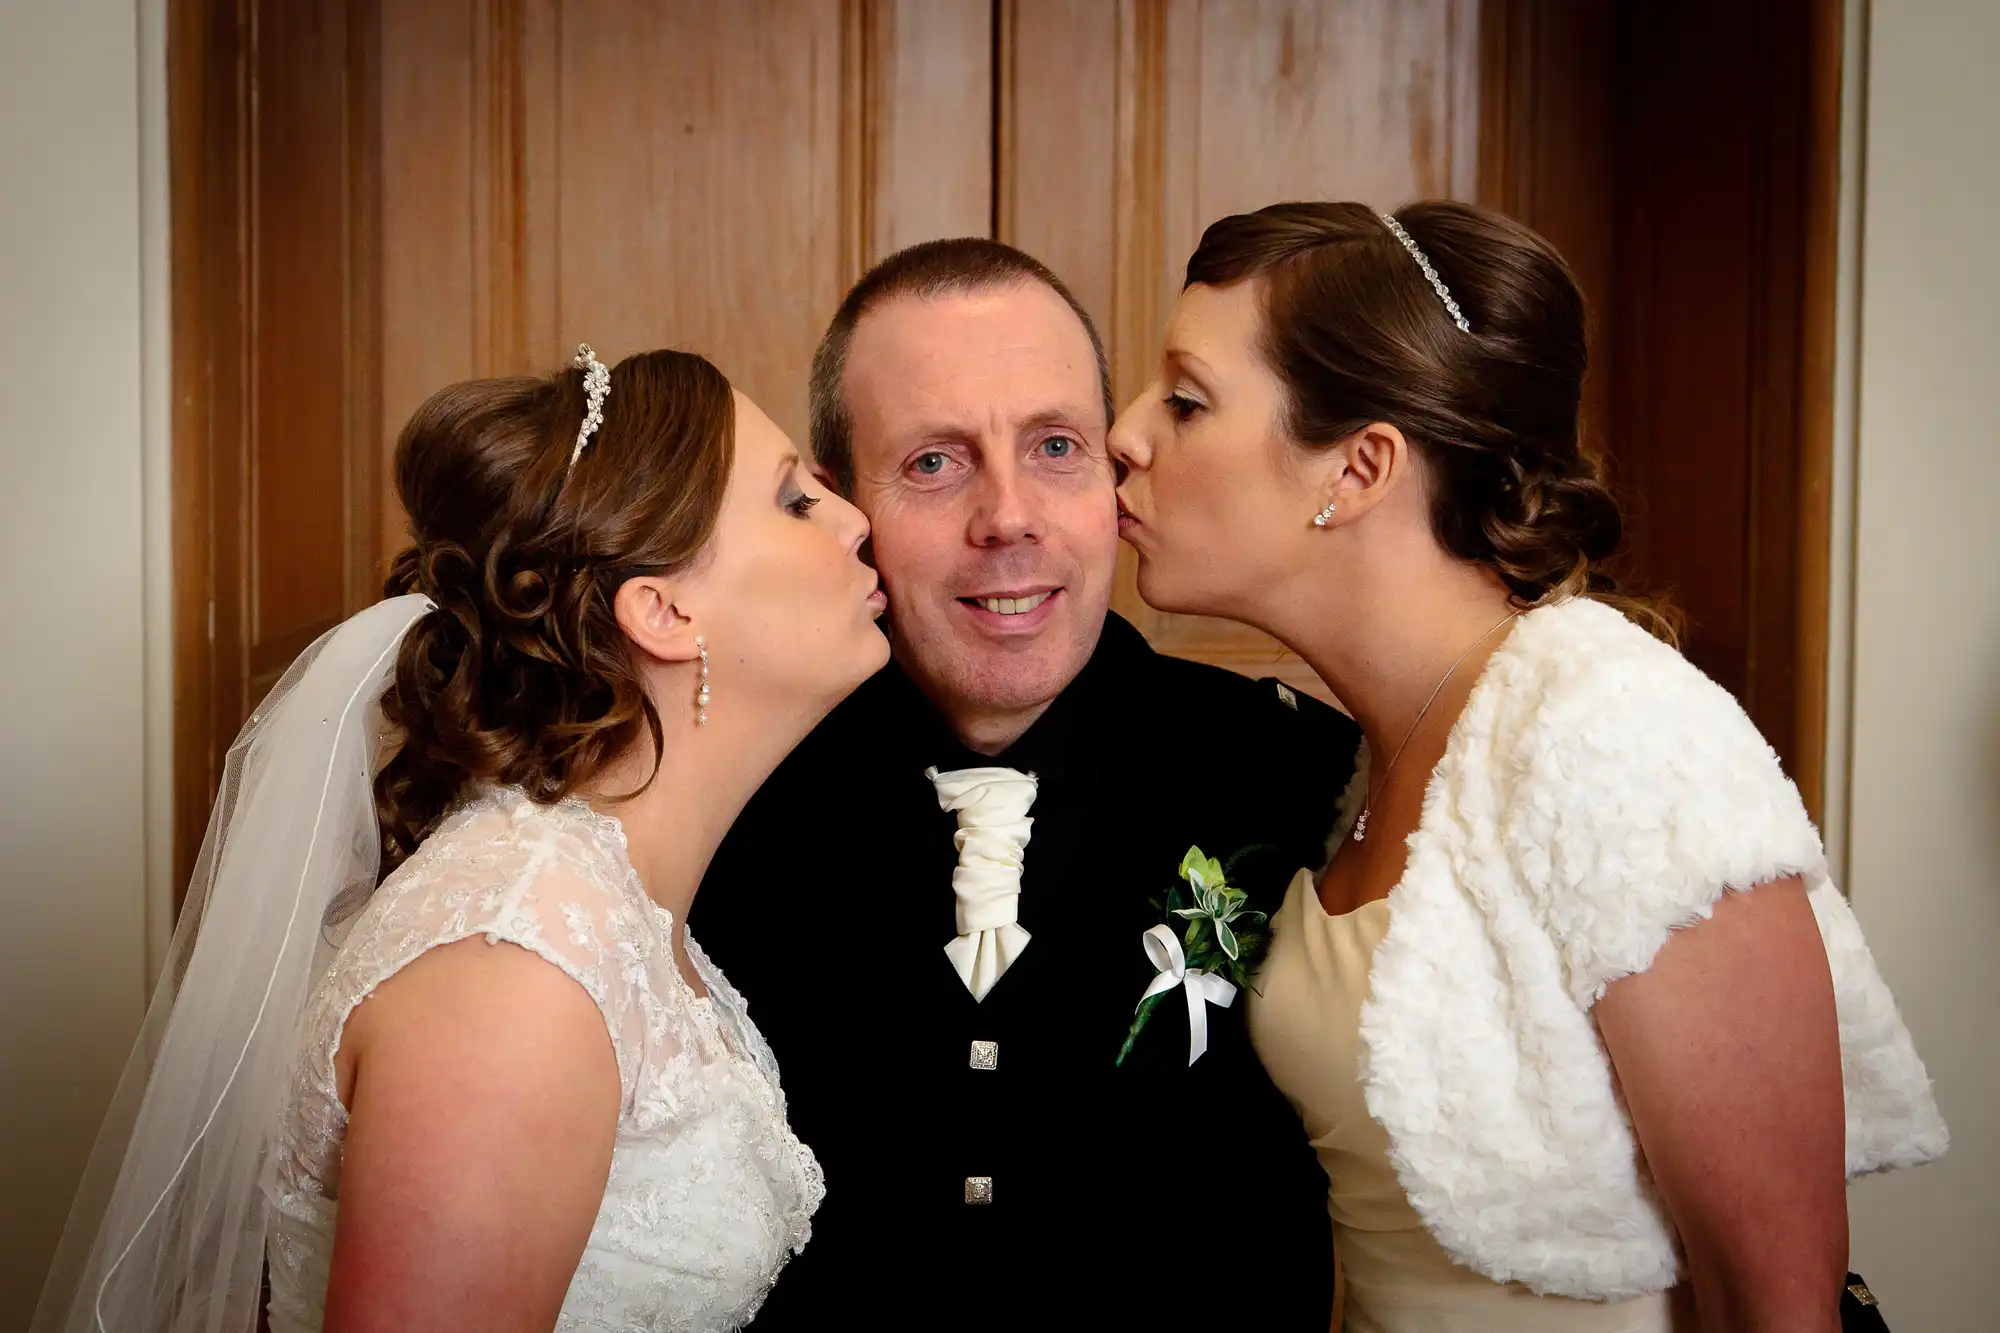 Two brides kissing a smiling groom on his cheeks in a wedding setting. all three are dressed in formal wedding attire.